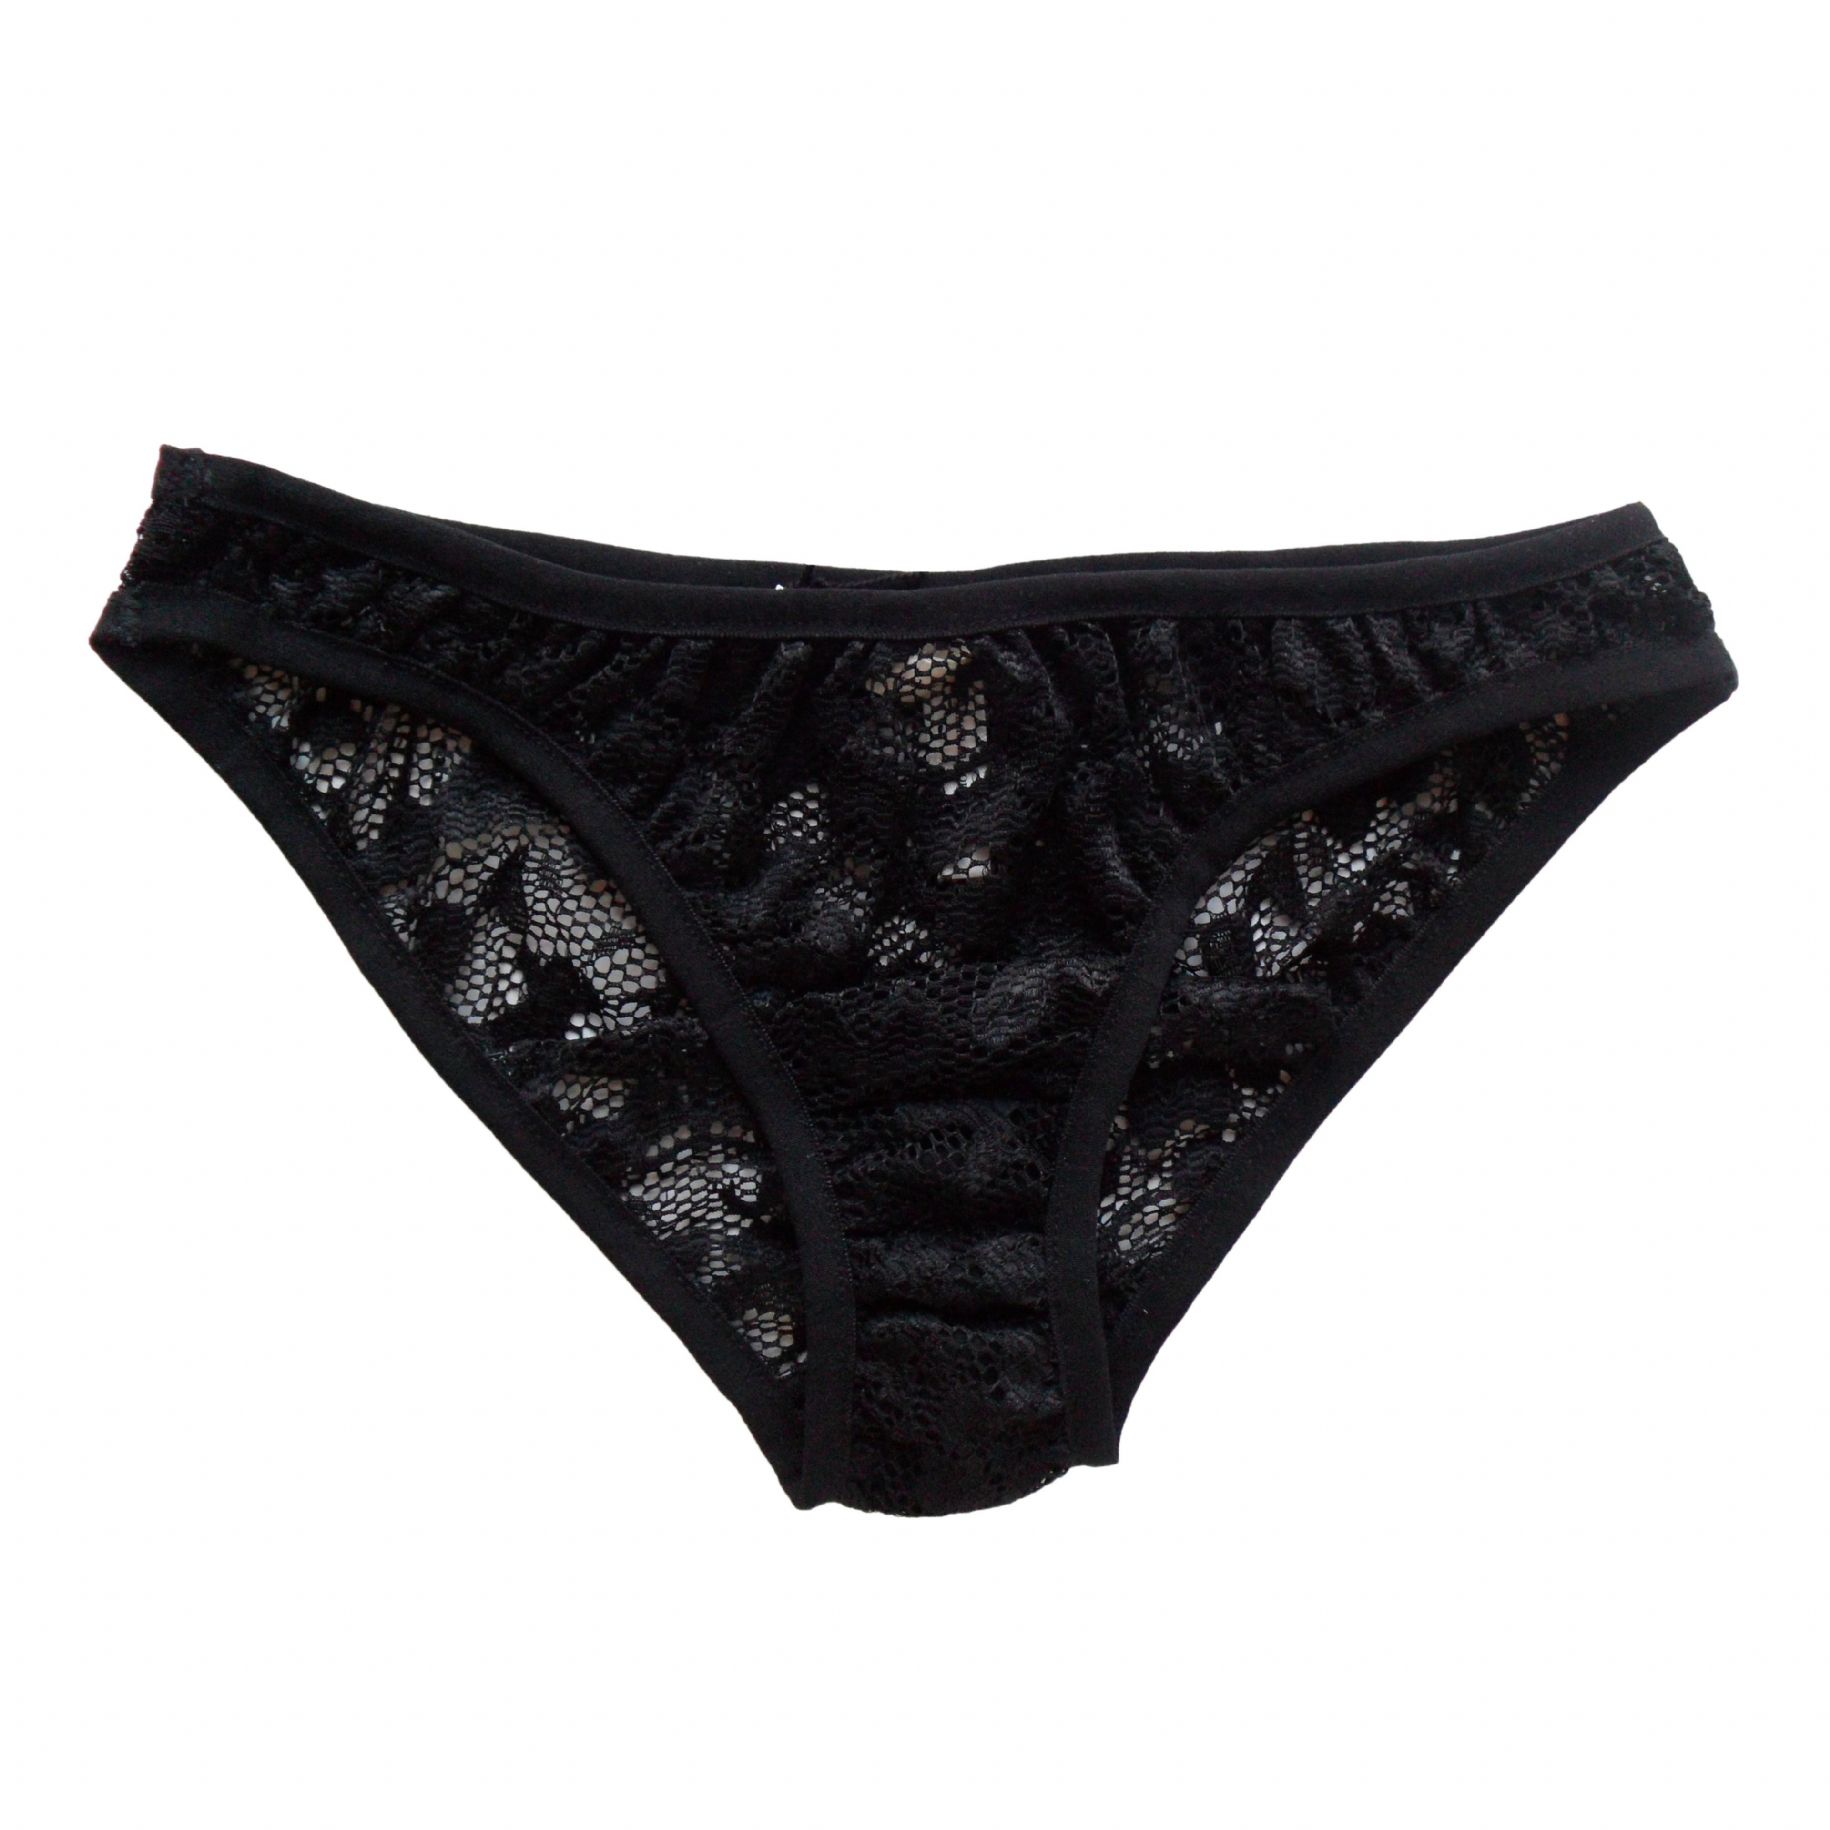 Zahra black floral lace knickers